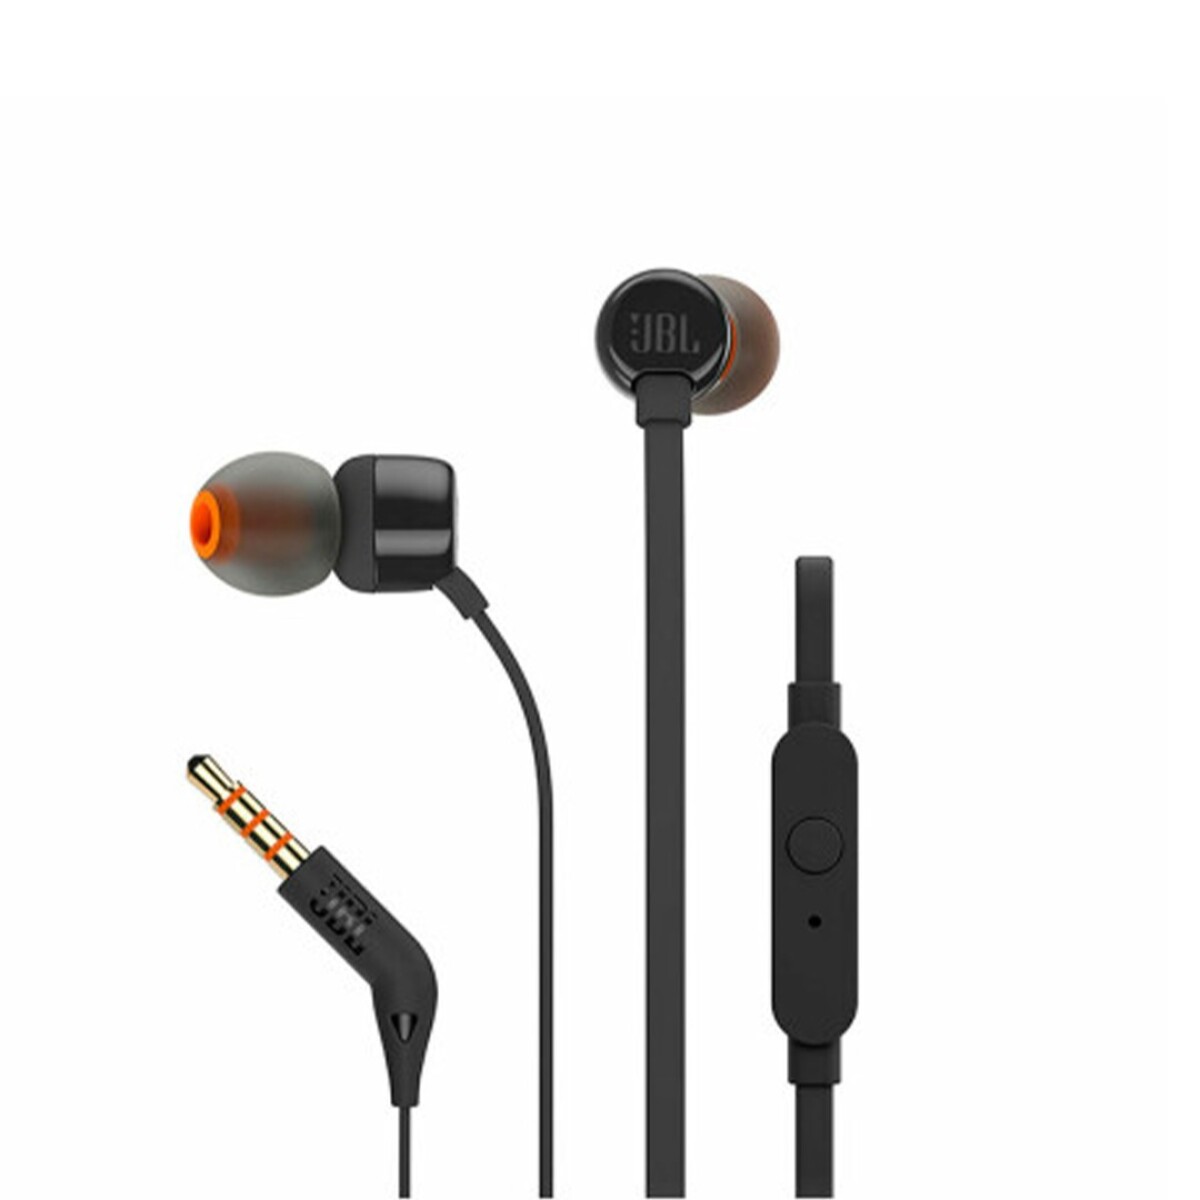 Auriculares Jbl T110 Micrófono Cable Plano - NEGRO 